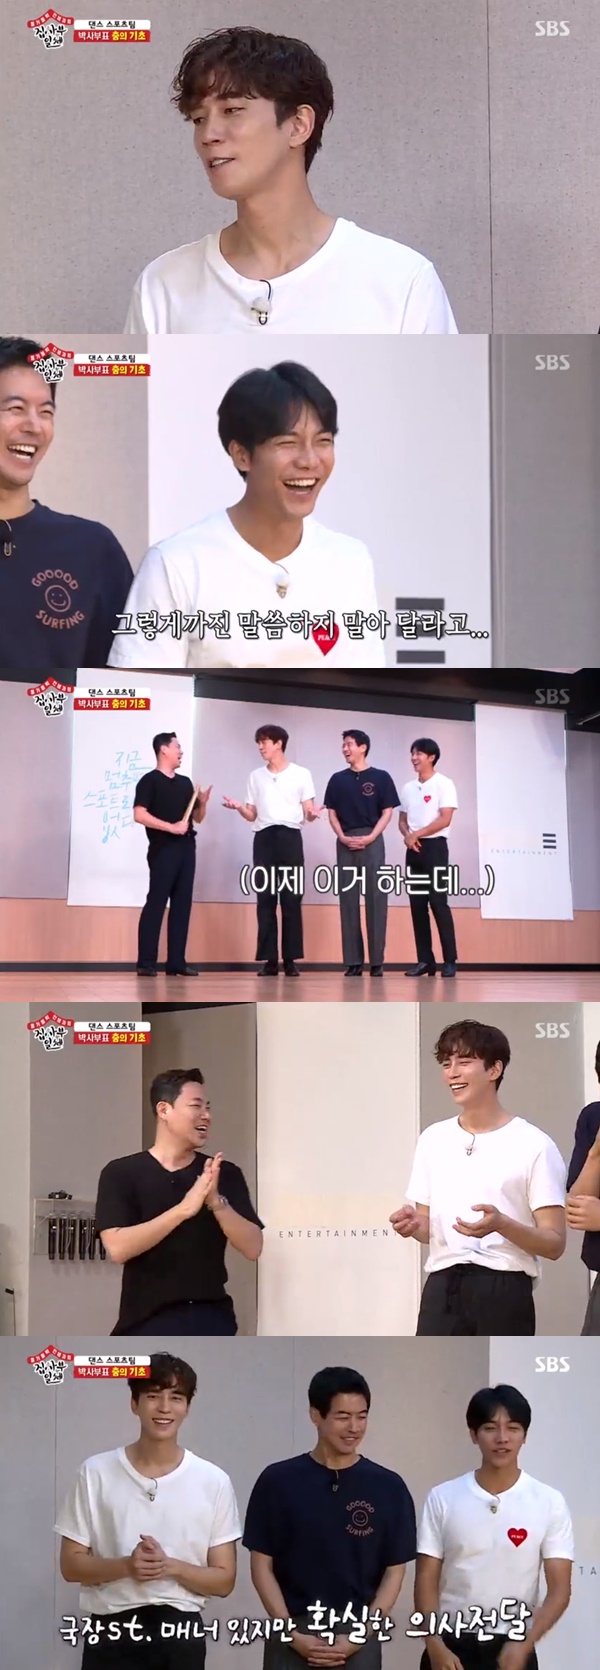 All The Butlers daily student Shin Sung-rok has embarrassed Master Park Ji-woo.In the SBS entertainment program All The Butlers broadcasted on the 8th, dancers Park Ji-woo and Jay Black appeared and performed dance lessons to Yang Se-hyeong upbringing agent Lee Sang-yoon Lee Seung-gi Shin Sung-rok.Park Ji-woo teased Shin Sung-rok in a hard tone, saying, Every March, a contest with a prize money of 100 million won will be held.Shin Sung-rok heard Lee Seung-gis instructions and told Park Ji-woo, Madame, do not tell me so far.I have learned one step now, he laughed.Lee Sang-yoon raised his hand, I have a question too, and Park Ji-woo, who was tasted for Shin Sung-rok teasing, said, Do it to Shin.Shin Sung-rok listened to Lee Sang-yoon and said, We are all new to the shoes.Surprised Park Ji-woo laughed when he said, Whats your tone?Shin Sung-rok, who is reddened, did not bow, but said, Lee Sang-yoon actor says that the shoe is new and wants to take off the vinyl.